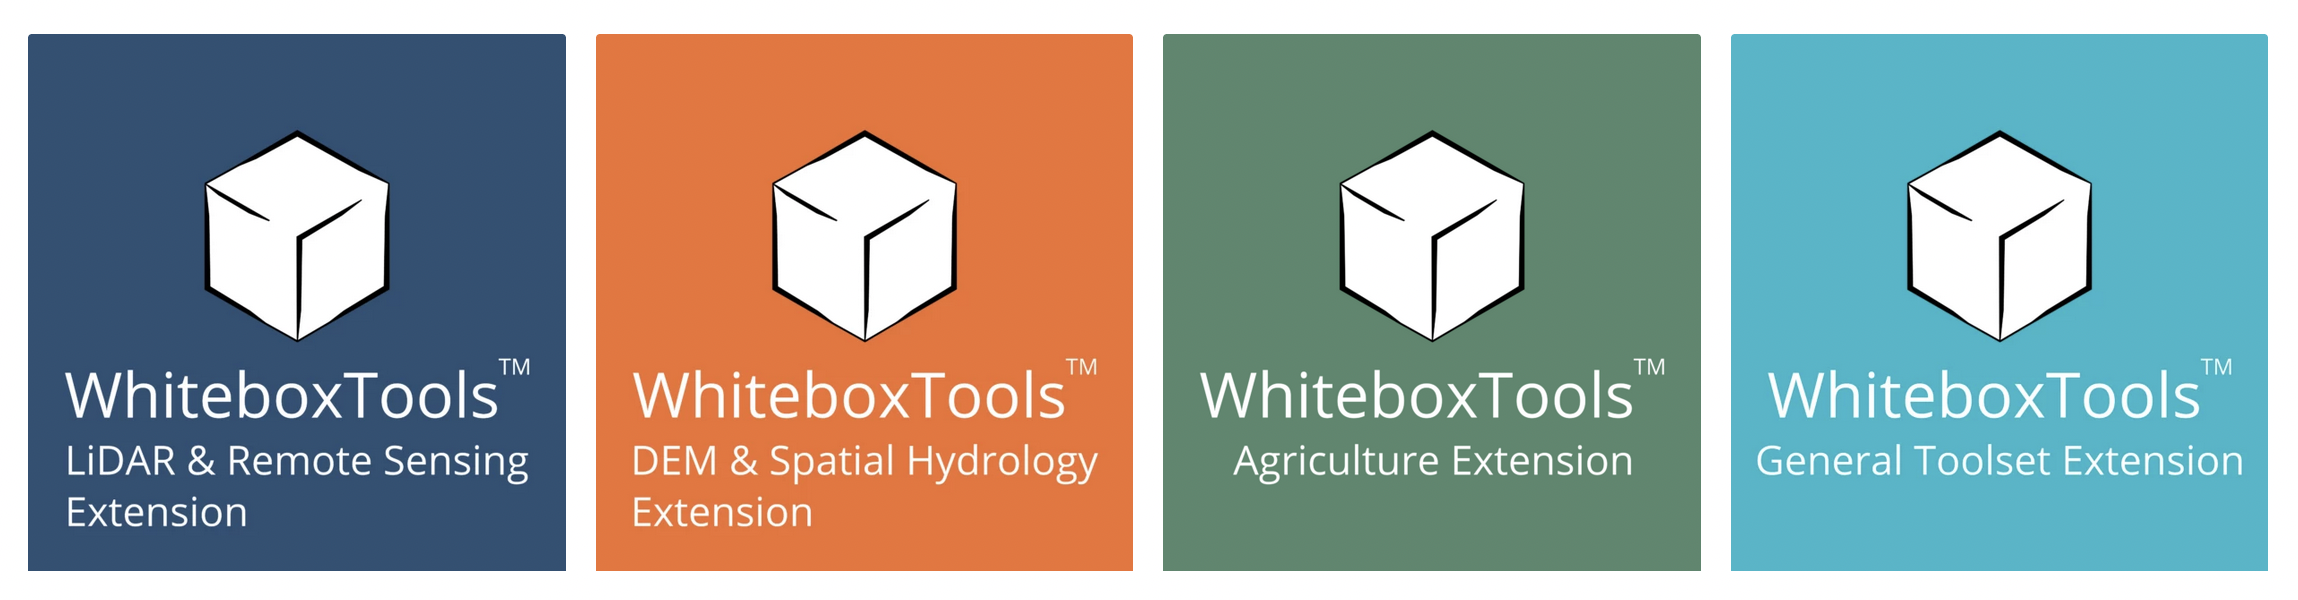 The WhiteboxTools extensions